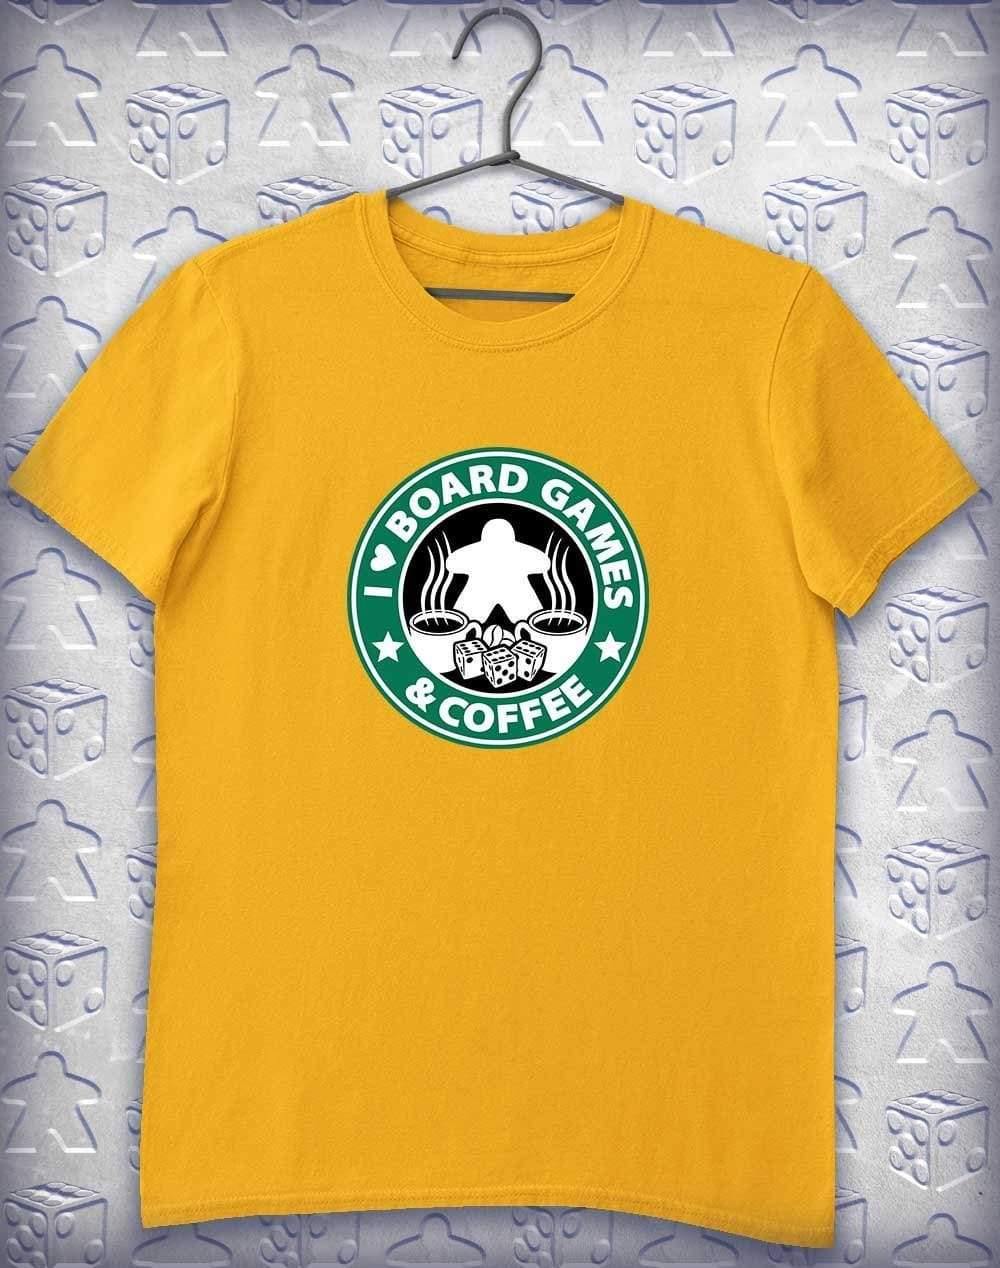 Board Games & Coffee Alphagamer T Shirt S / Gold  - Off World Tees